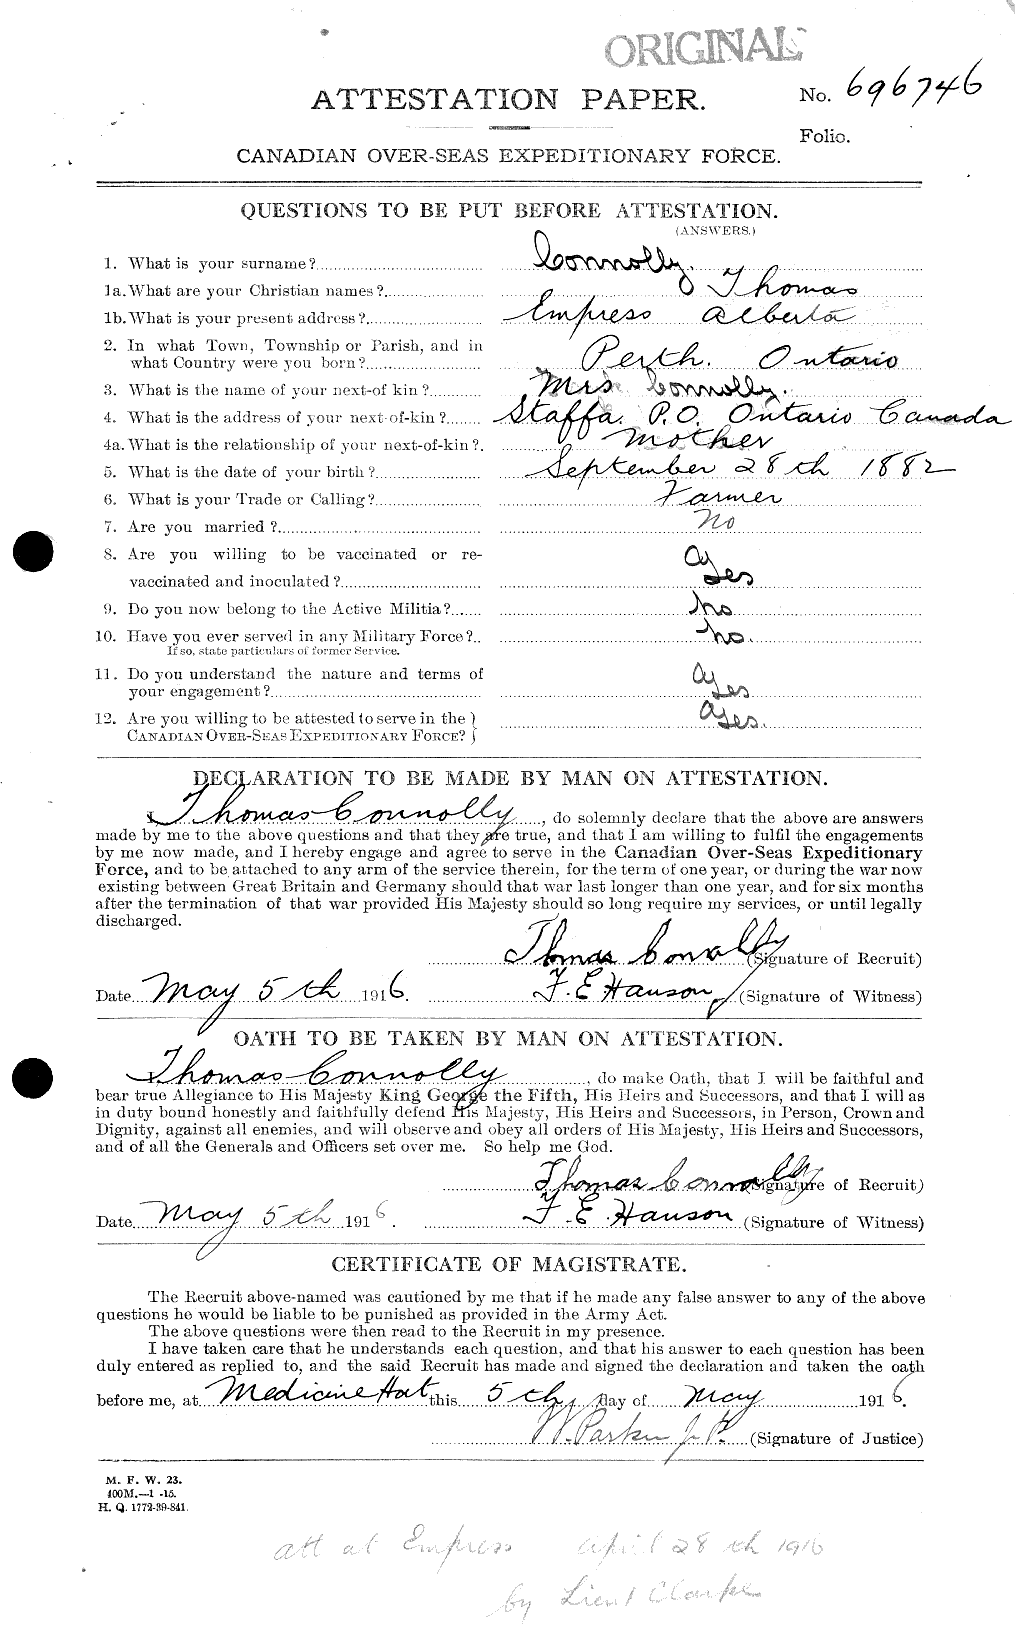 Personnel Records of the First World War - CEF 038216a